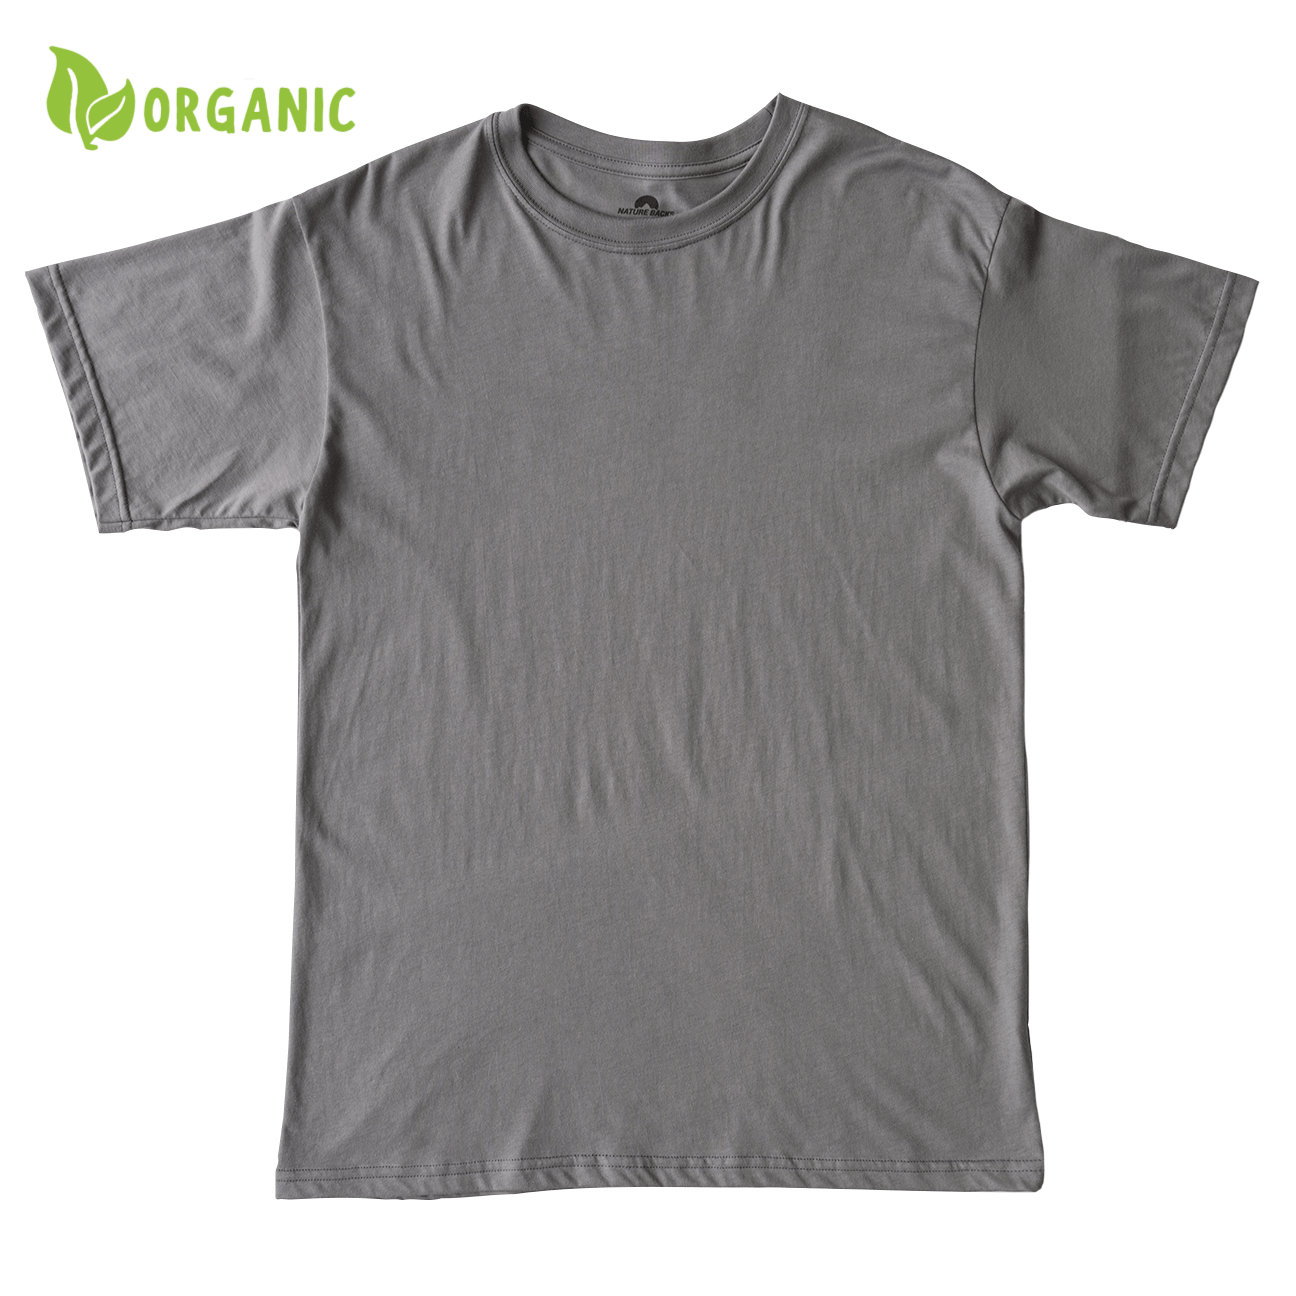 Nature Backs Short Sleeve 100% Organic Cotton T-Shirt | Minimalist Slate Short Sleeve made with Eco-Friendly Fibers Sustainably made in the USA 